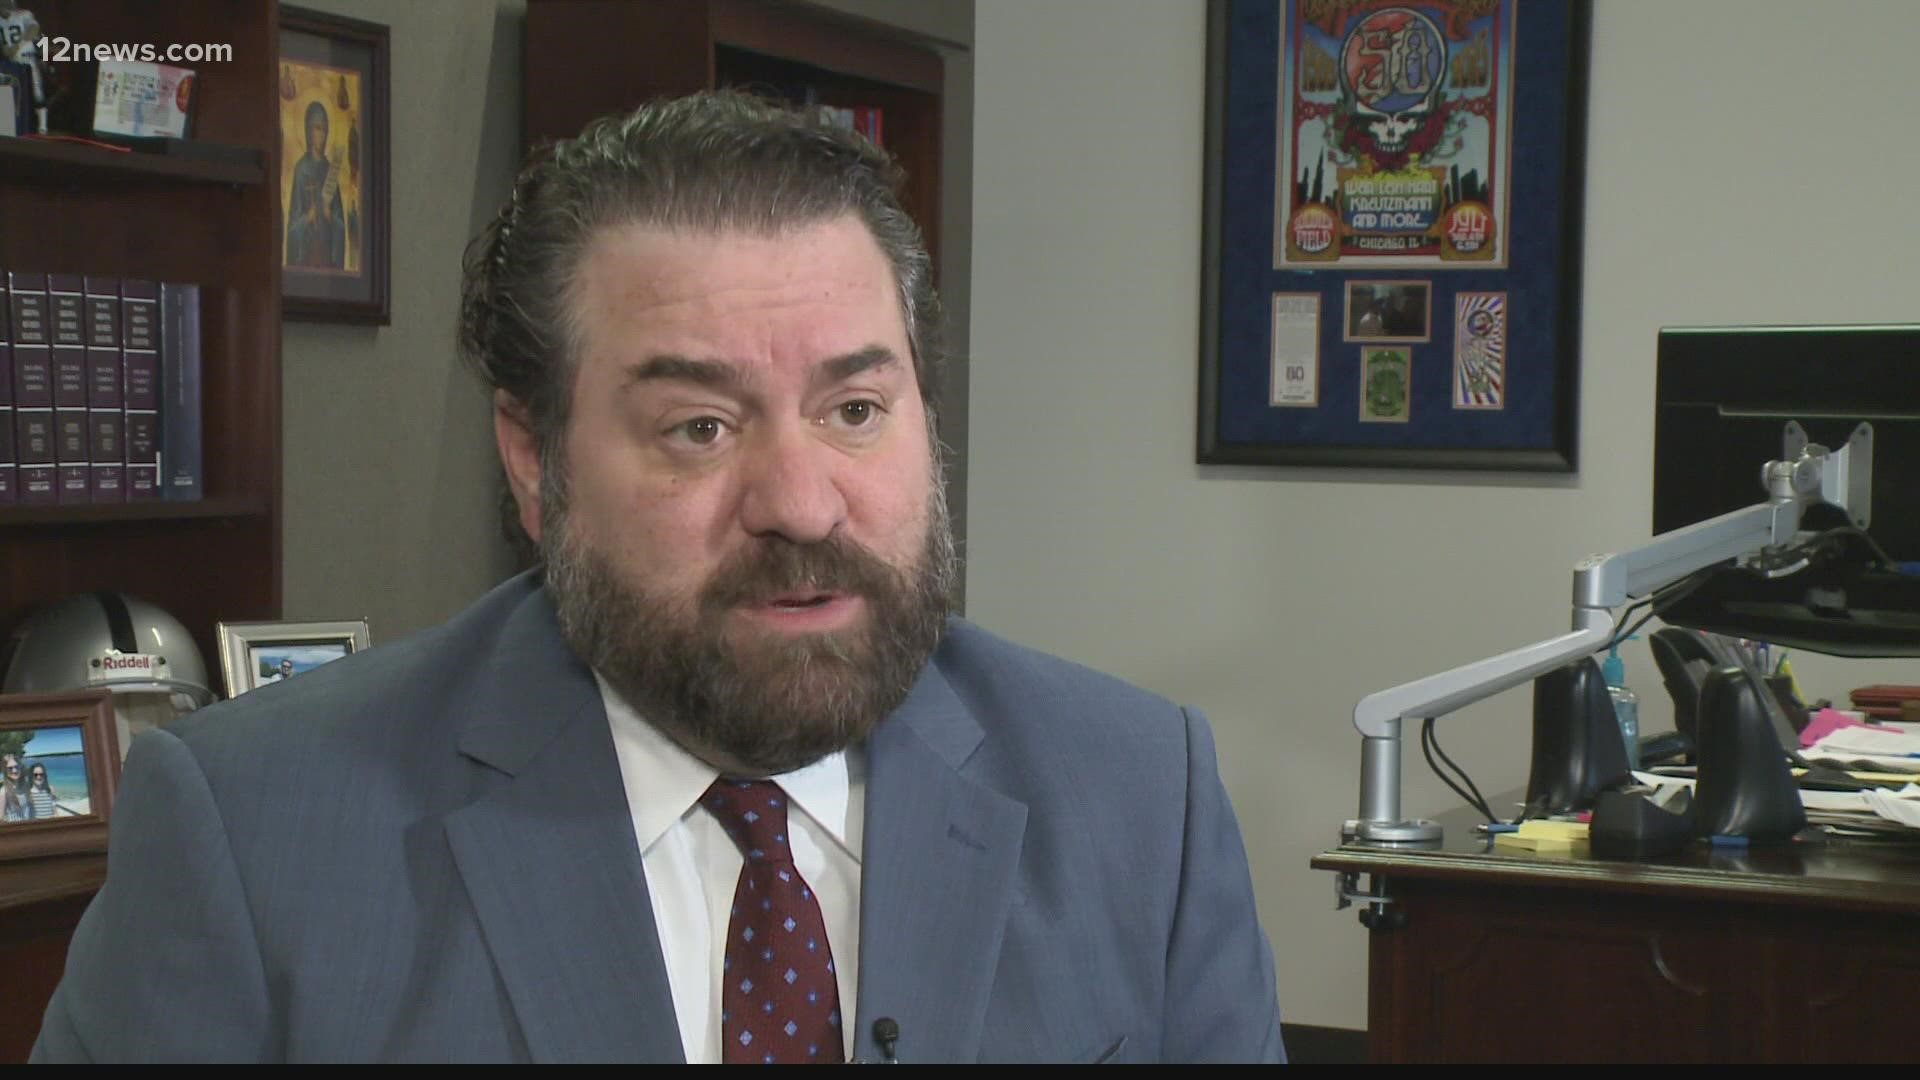 Arizona Attorney General Mark Brnovich is raising new questions about the 2020 election. The claims come even though he's on record saying Democrat Joe Biden won.